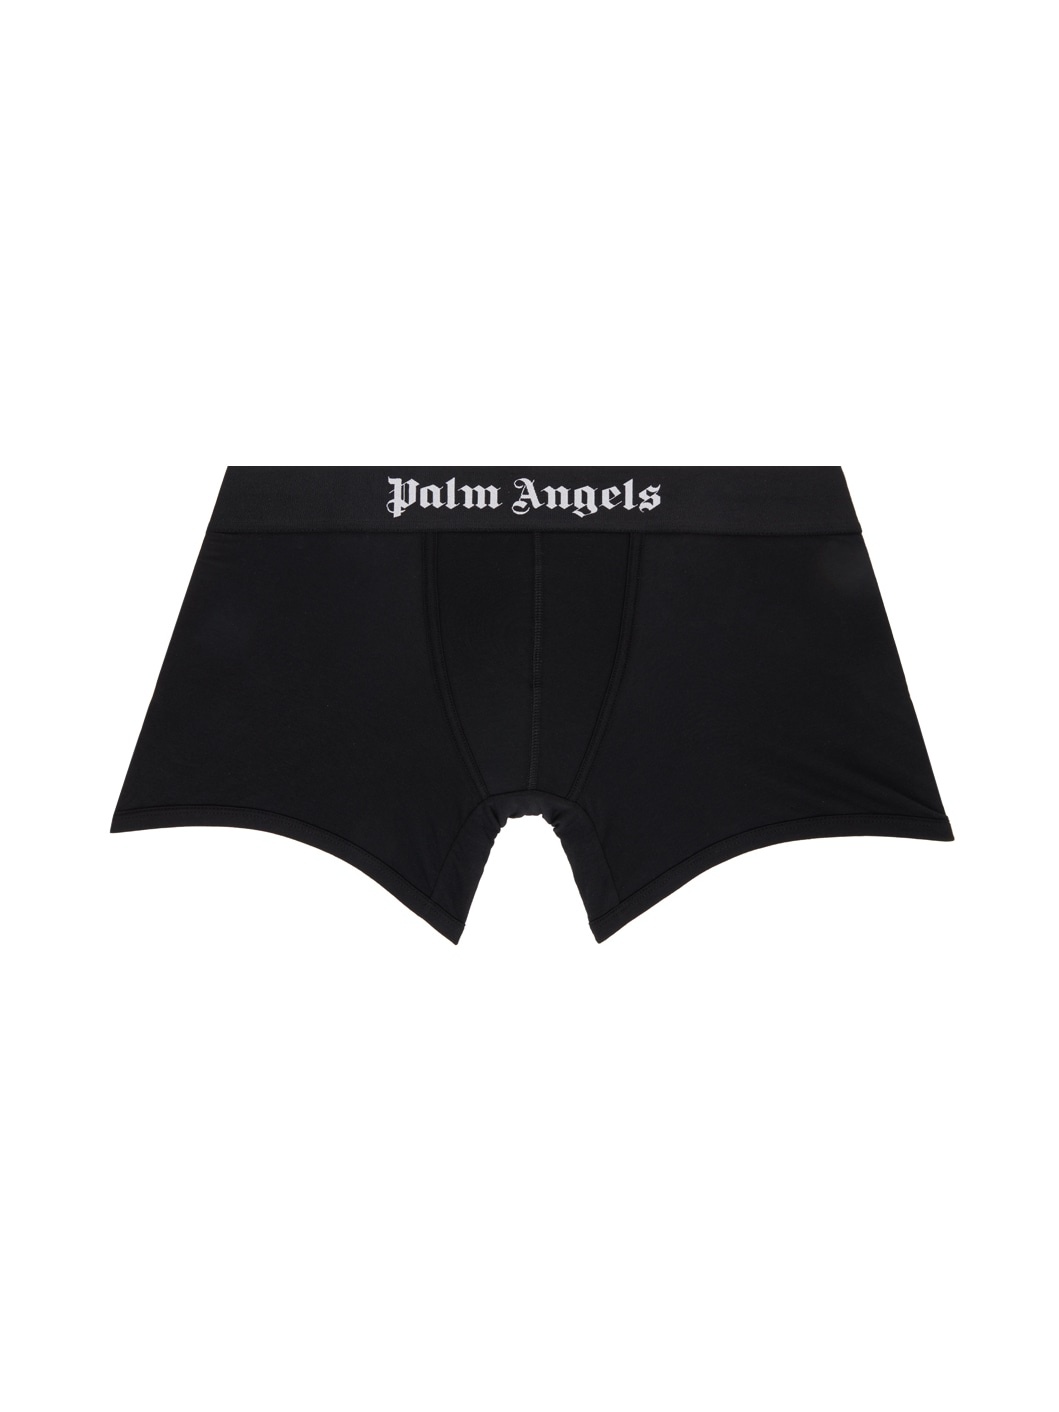 Two-Pack Black 'Palm Angels' Boxers - 2